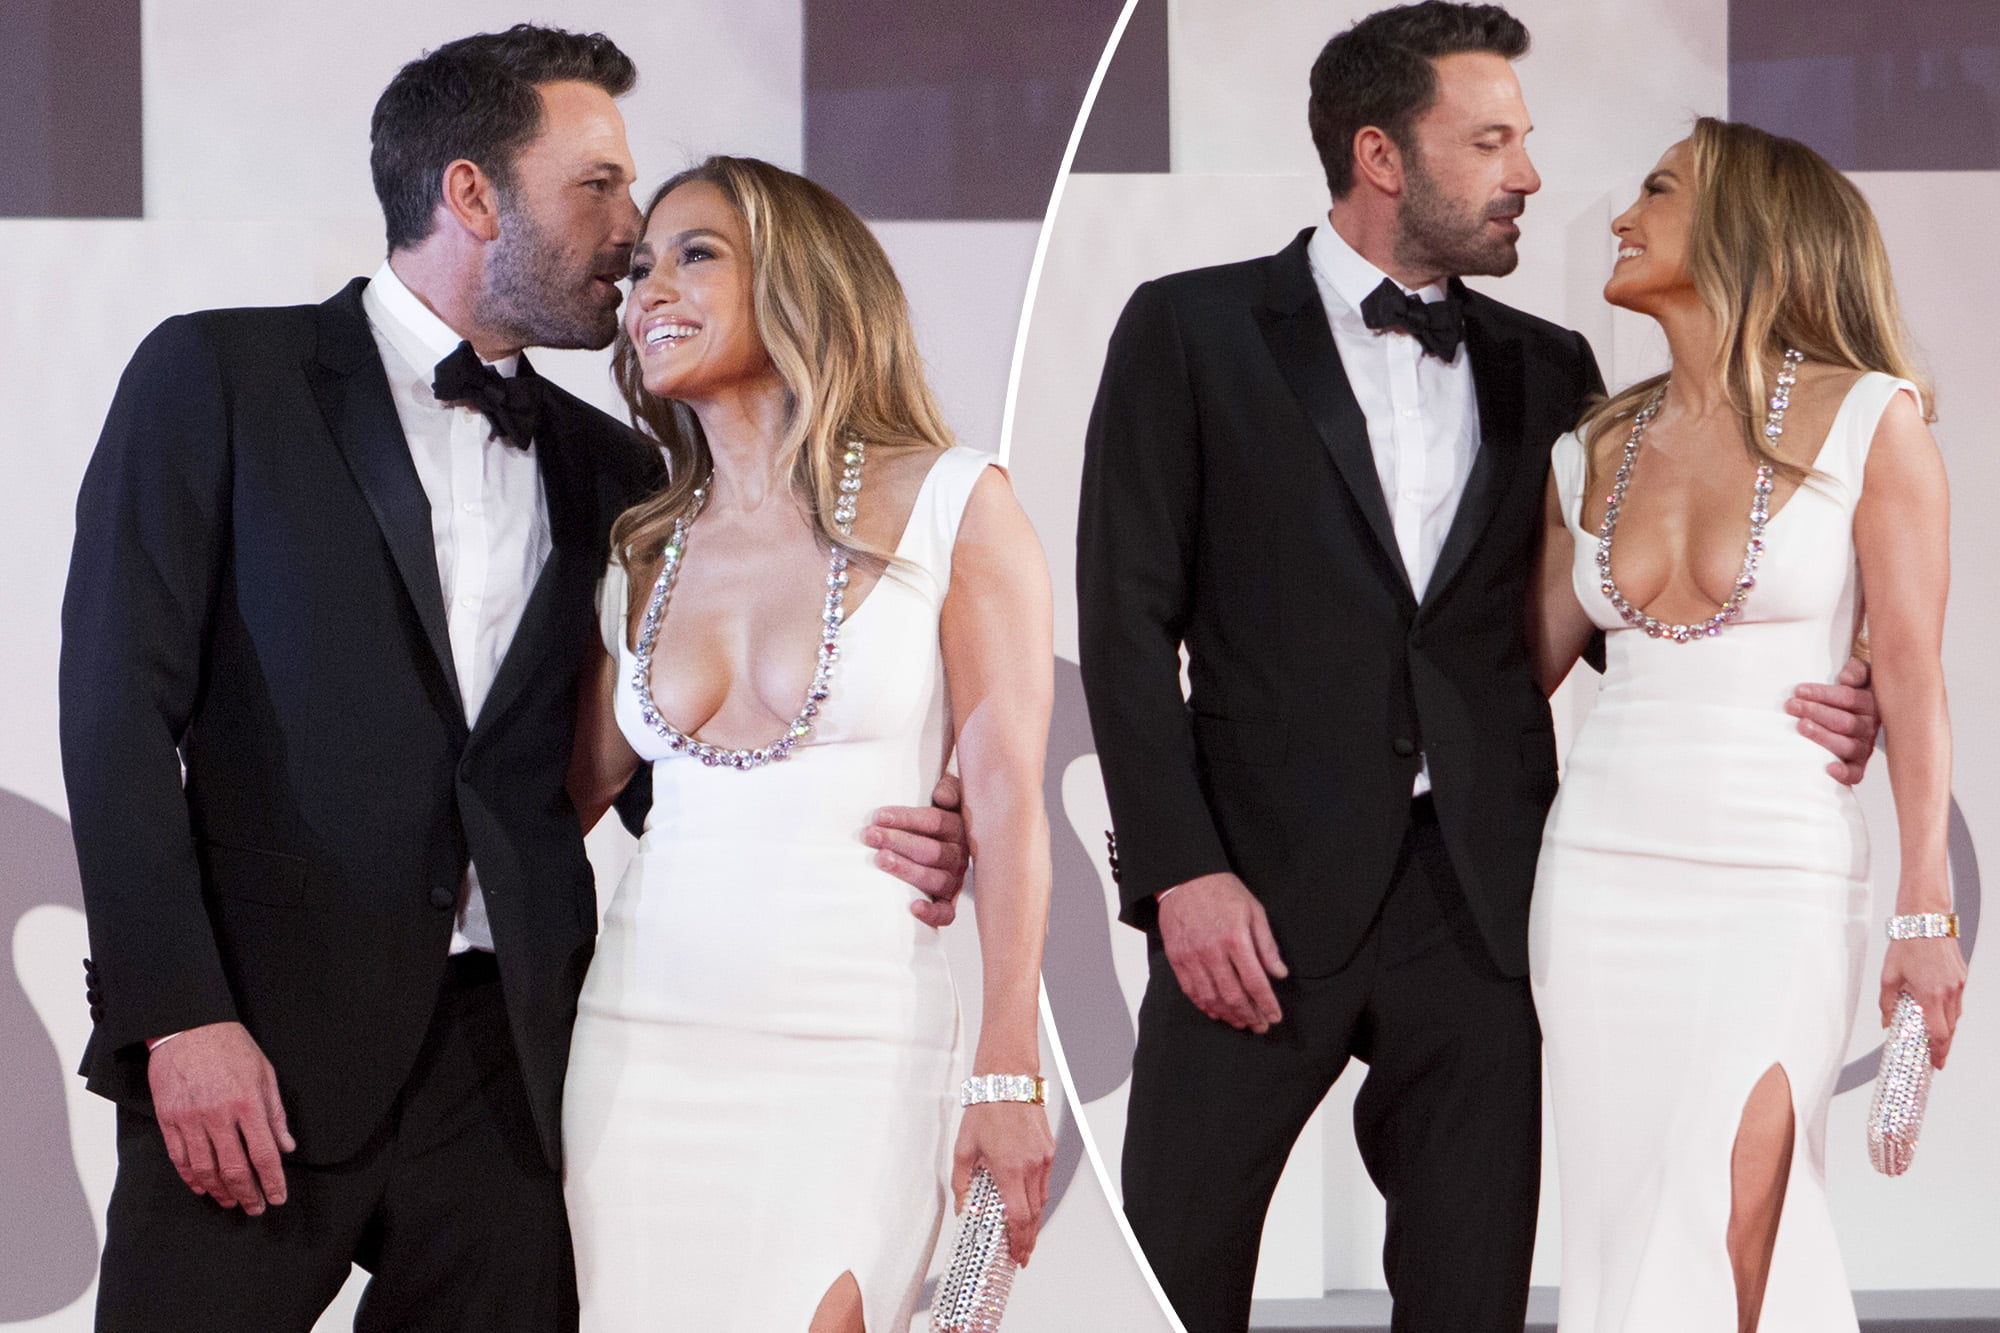 Ben Affleck and Jennifer Lopez are Getting Secretly Engaged according to Insider Sources – Dominique Clare